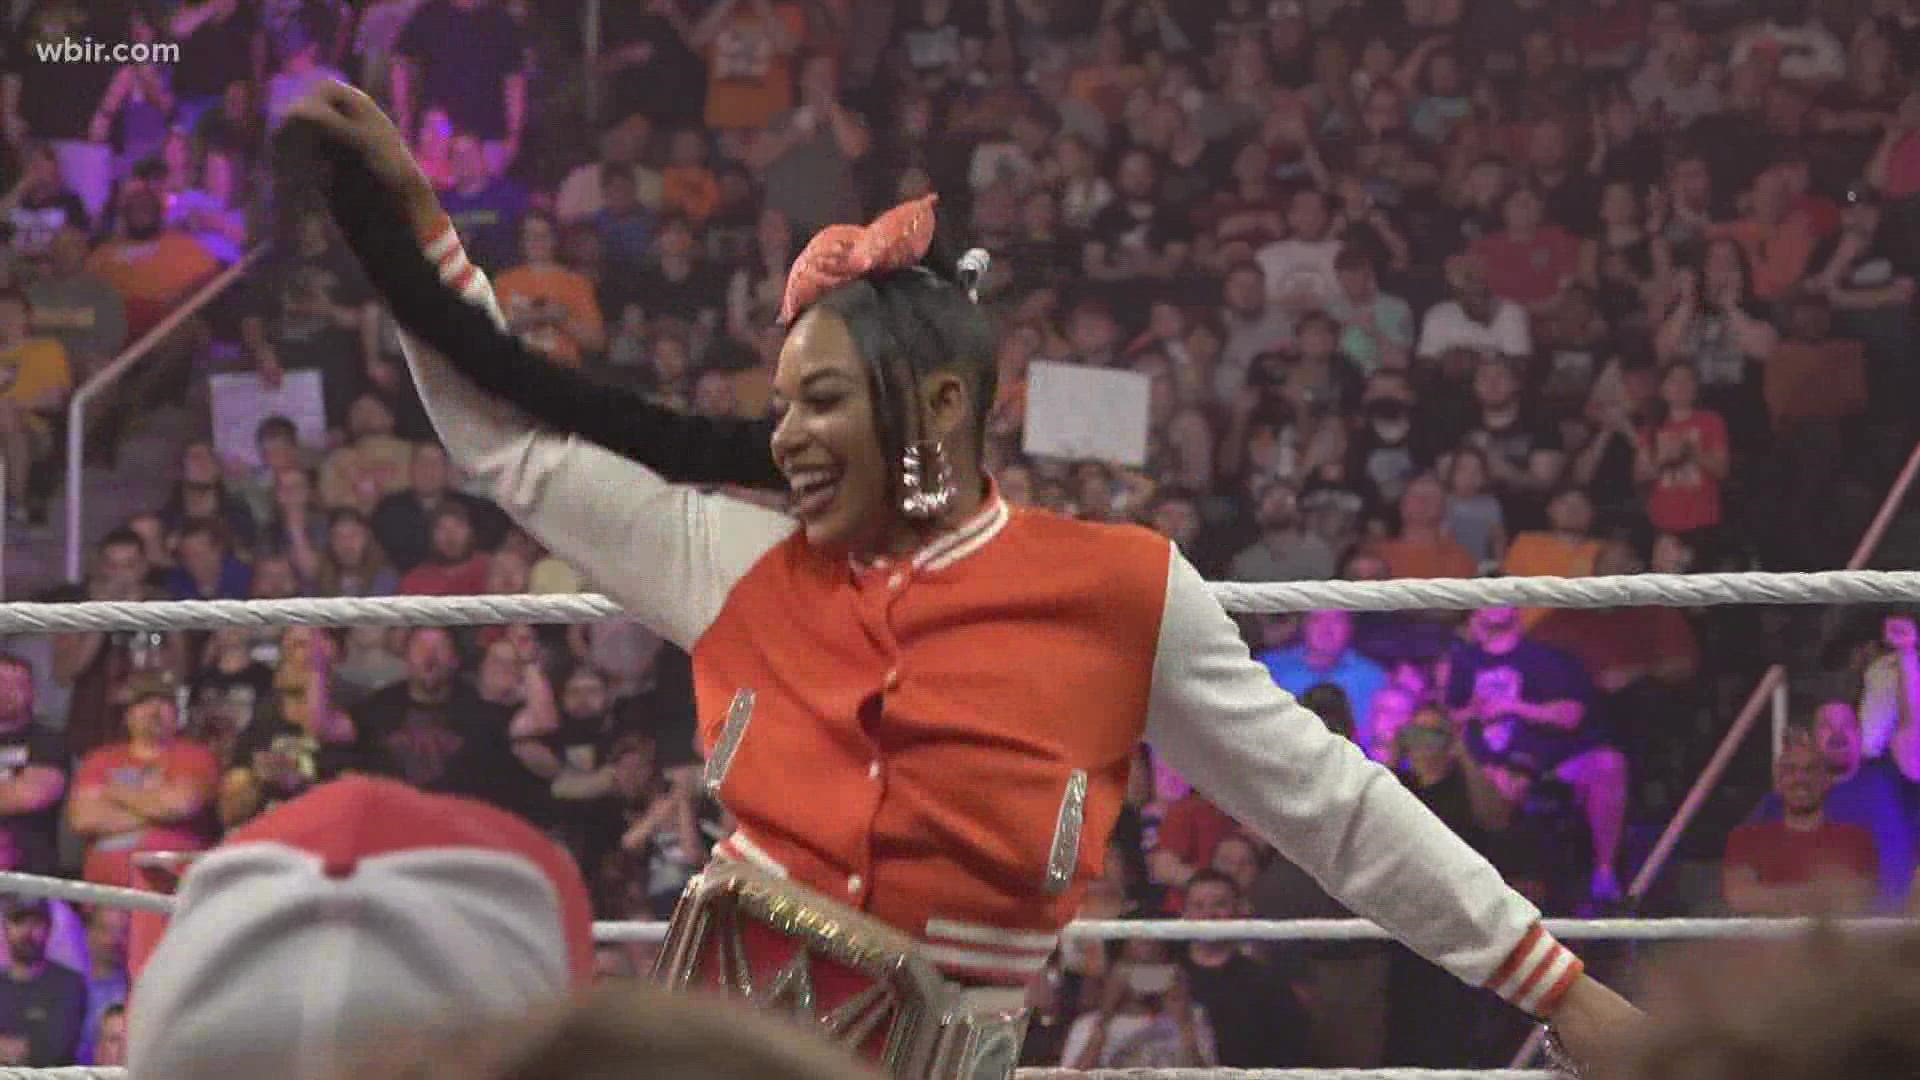 It's the third Knoxville homecoming for the WWE standout.